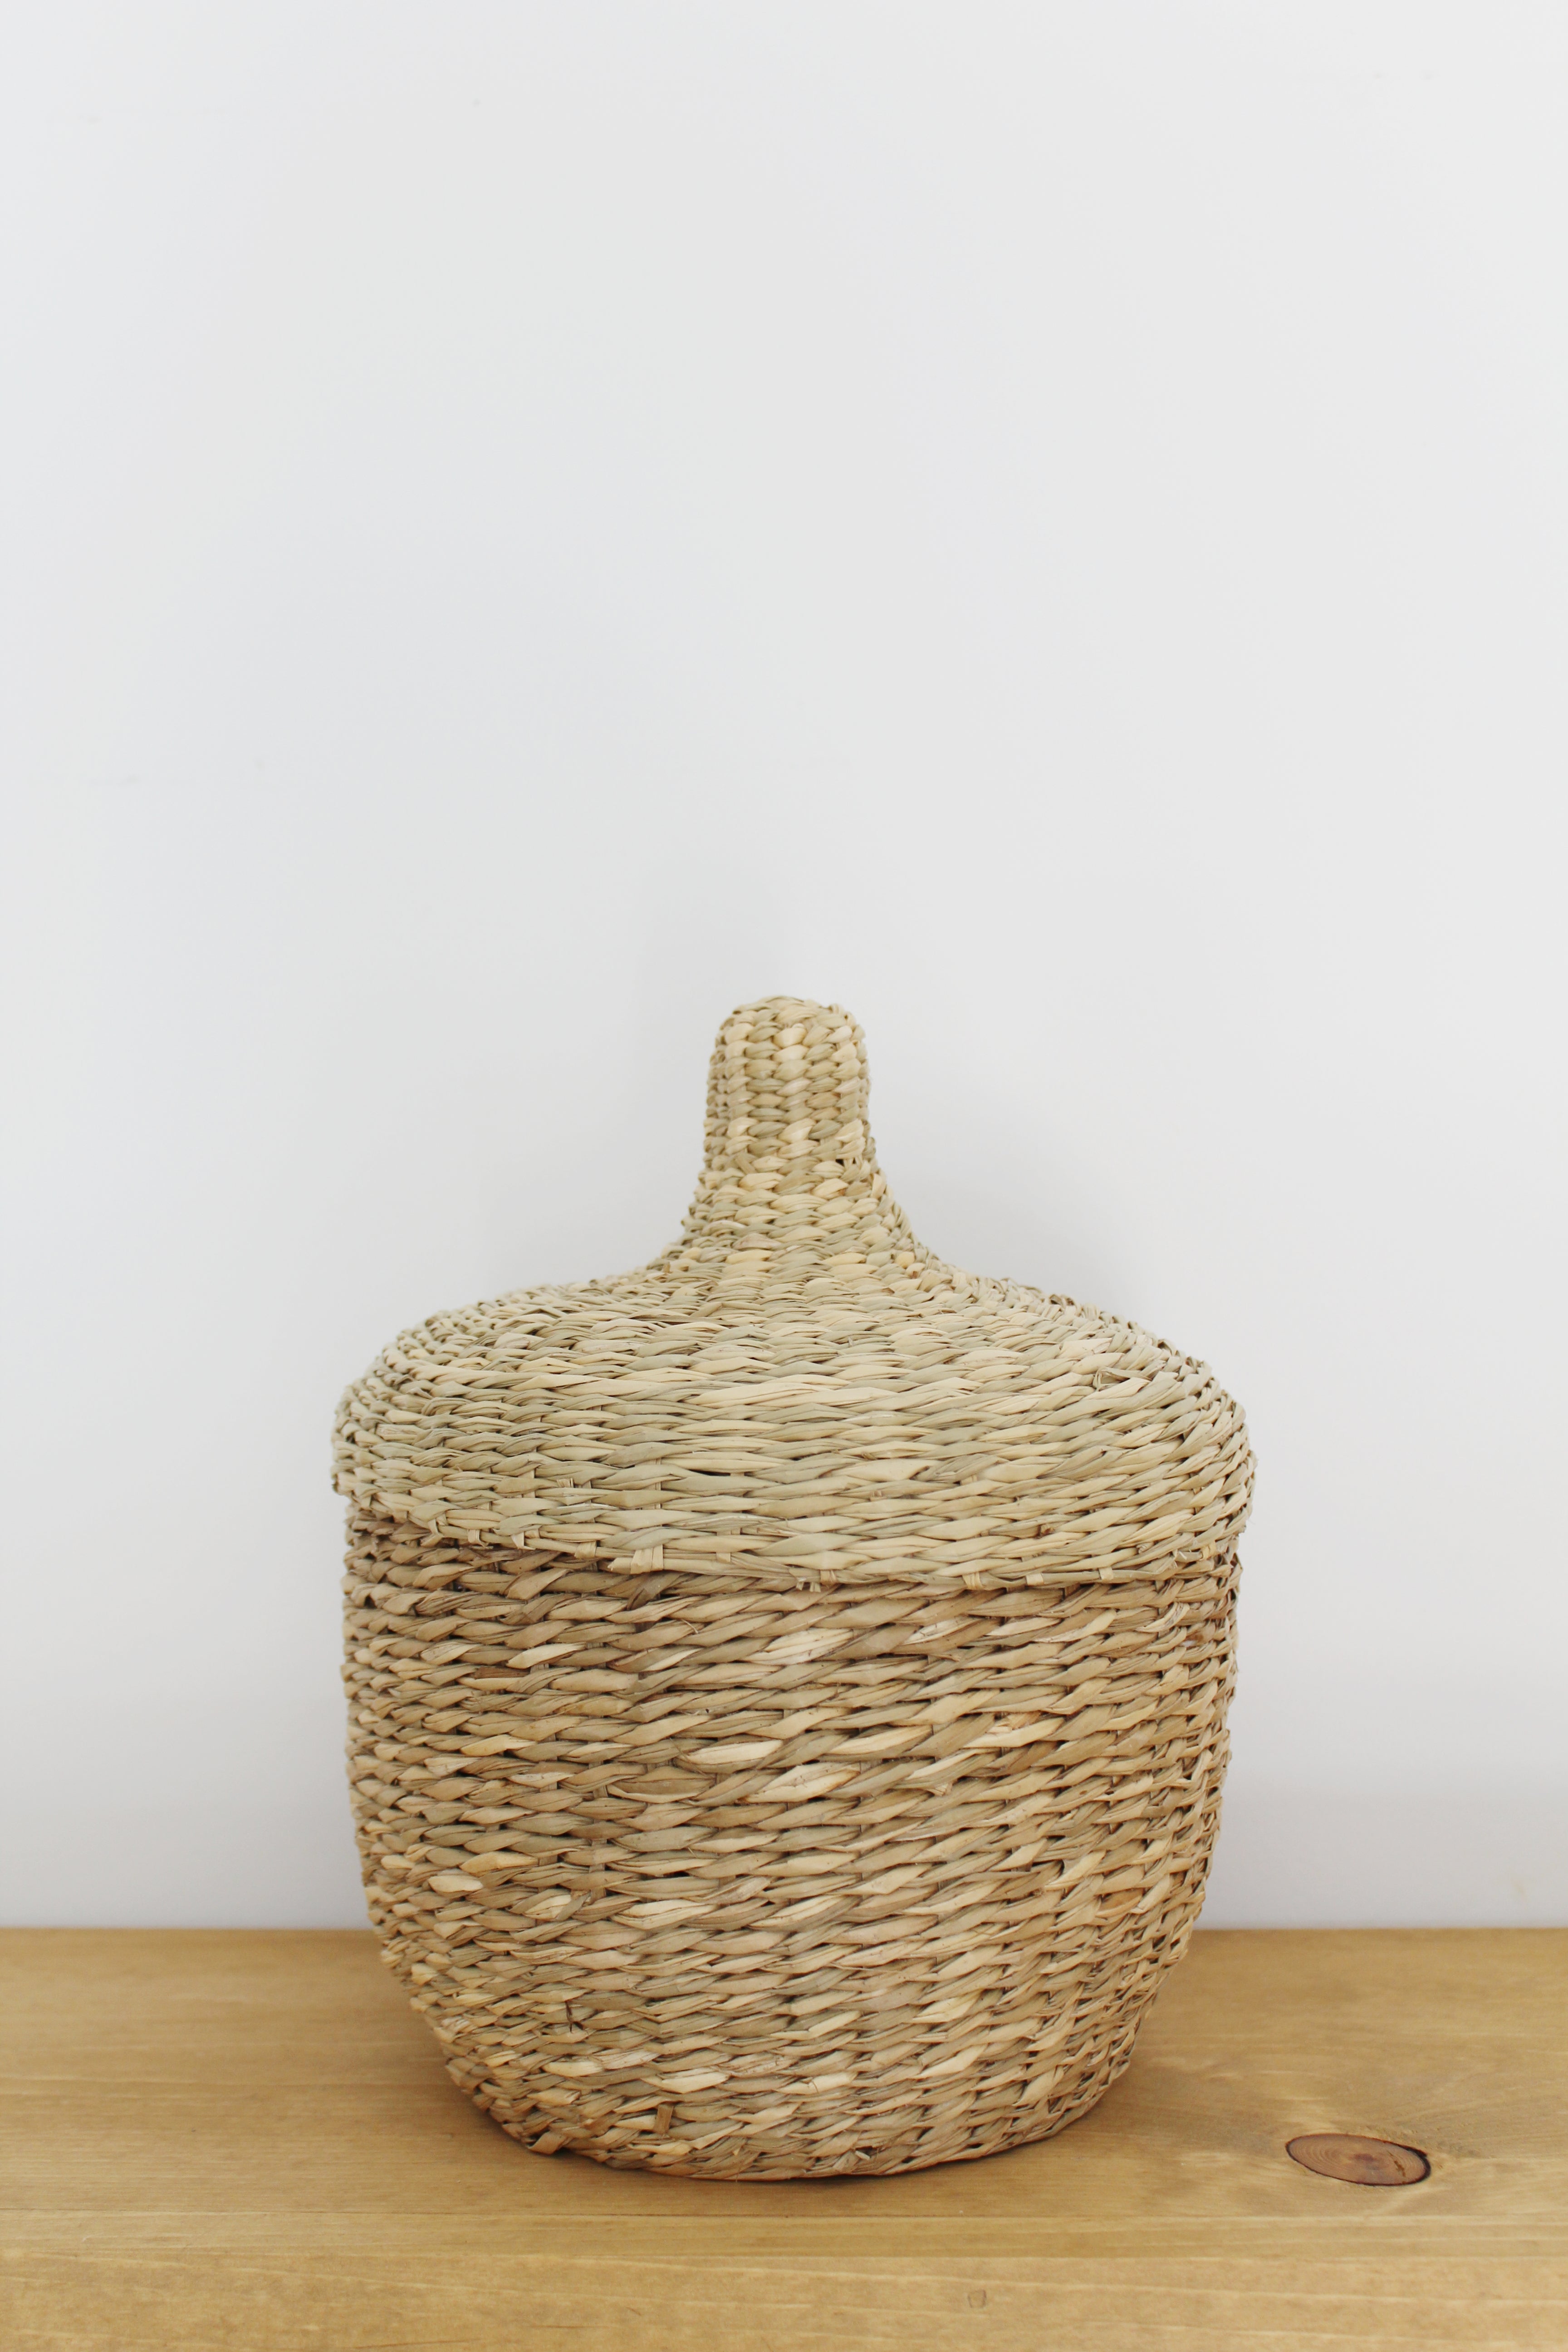 Seagrass baskets with lids